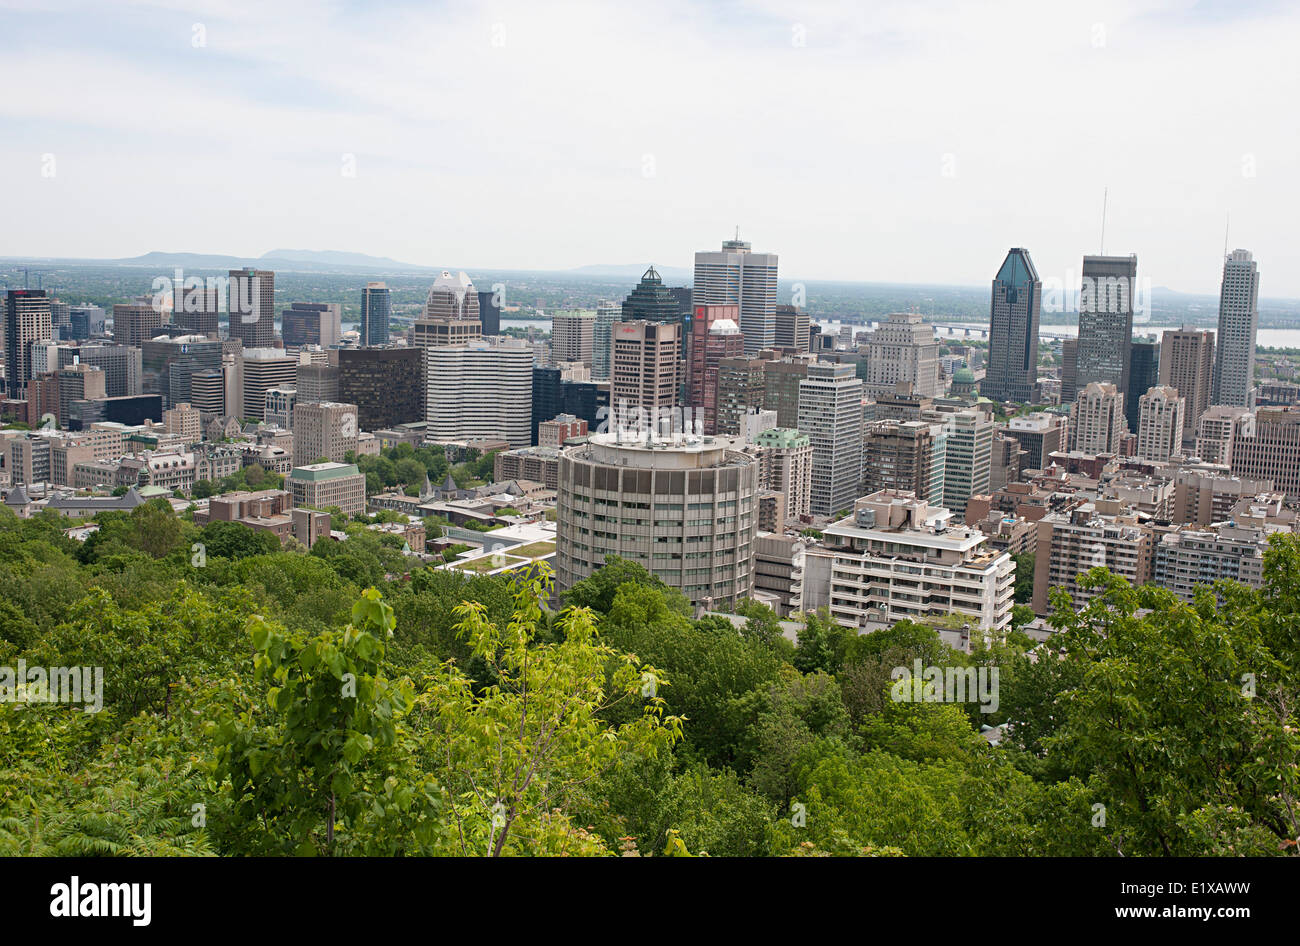 View of Montreal City from the plaza on Mount Royal Lookout Hill. Stock Photo